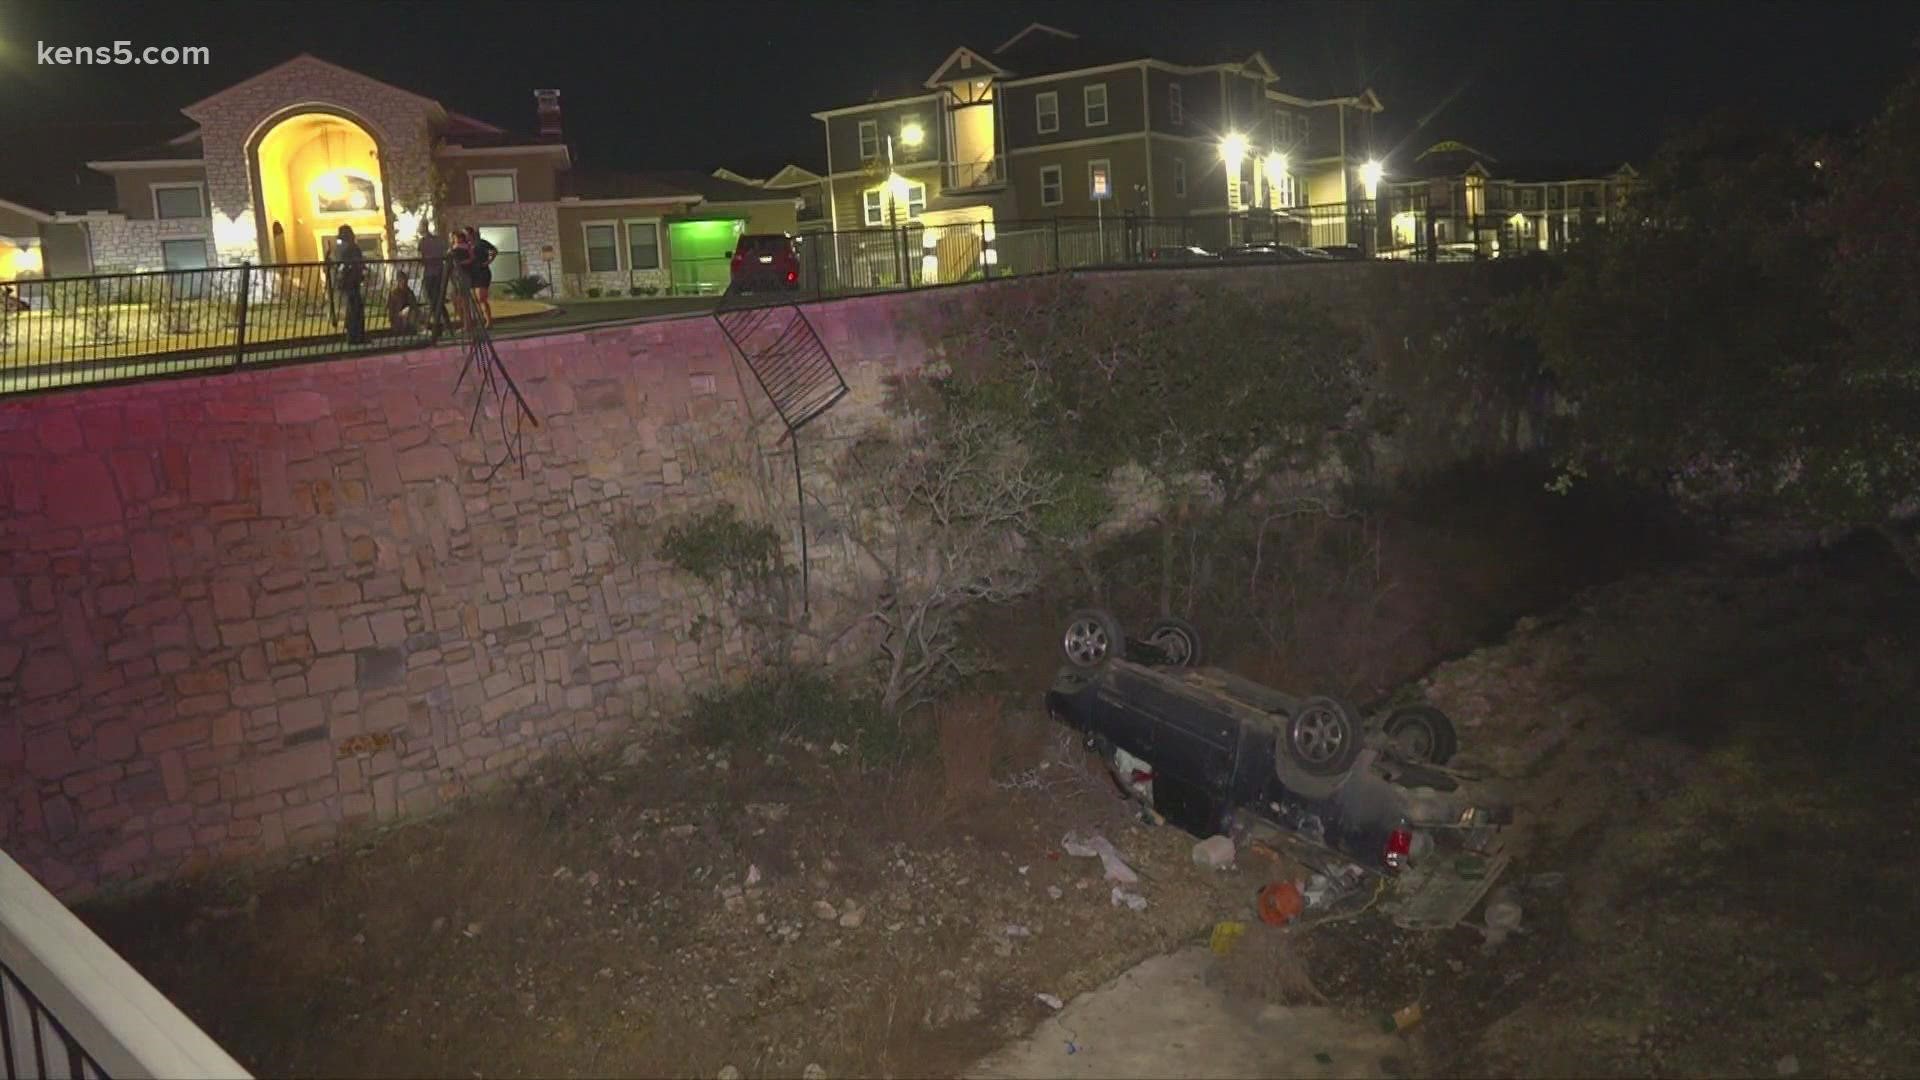 A man was pulling into an apartment complex when he took too wide of a turn and drove into a ditch. Miraculously, he only suffered minor scrapes.